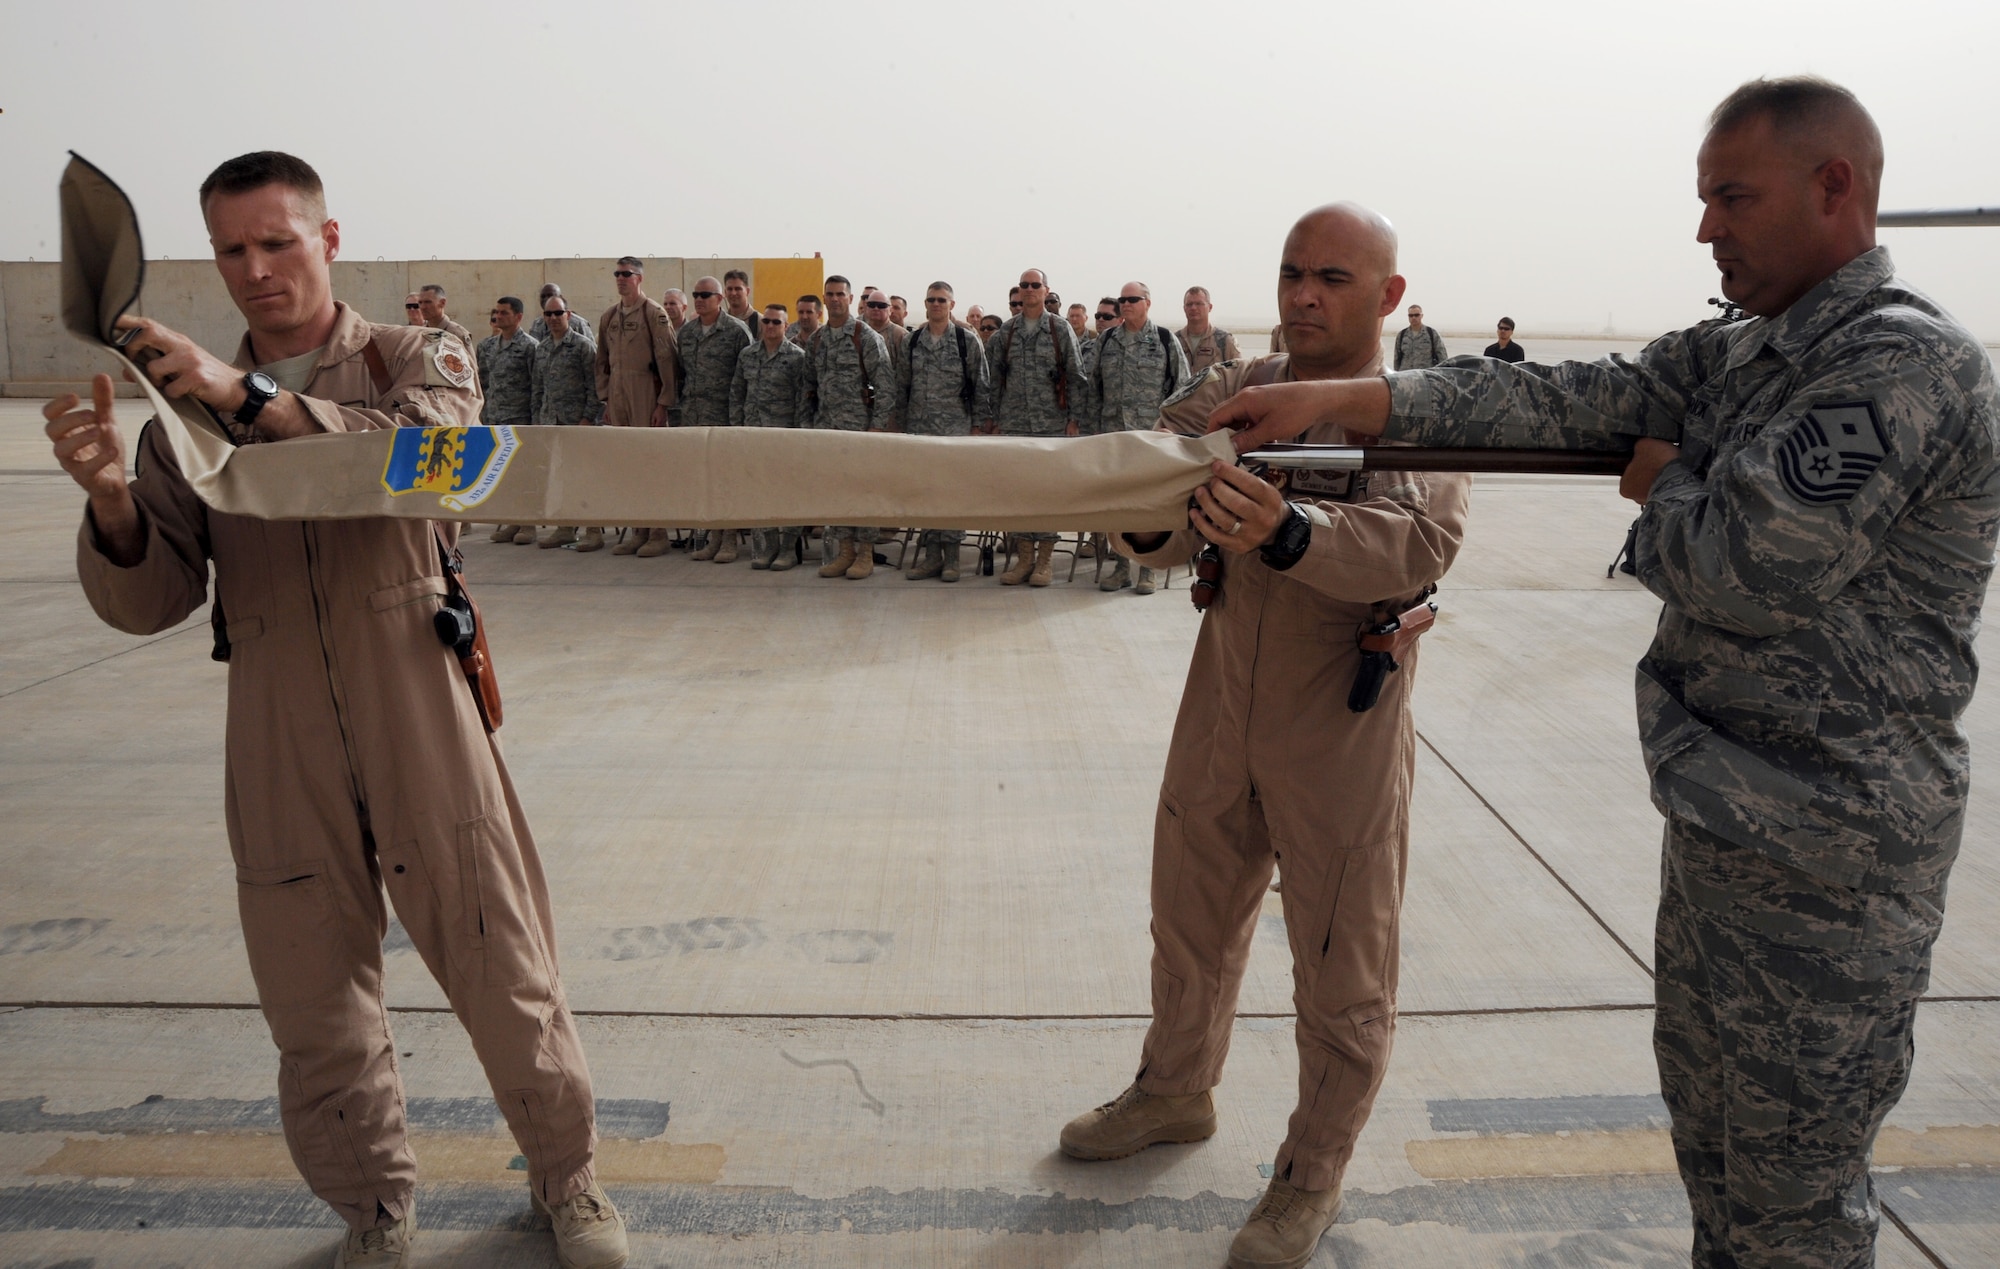 JOINT BASE BALAD, Iraq-- Colonel Lance Landrum, left, 332nd Expeditionary Operations Group commander, and Lt. Col. Dennis King, middle, 777th Expeditionary Airlift Squadron commander, encase the 777th EAS flag as a symbol of the squadron’s inactivation May 6, 2011. (U.S. Air Force photo/Staff Sgt. Keyonna Fennell)